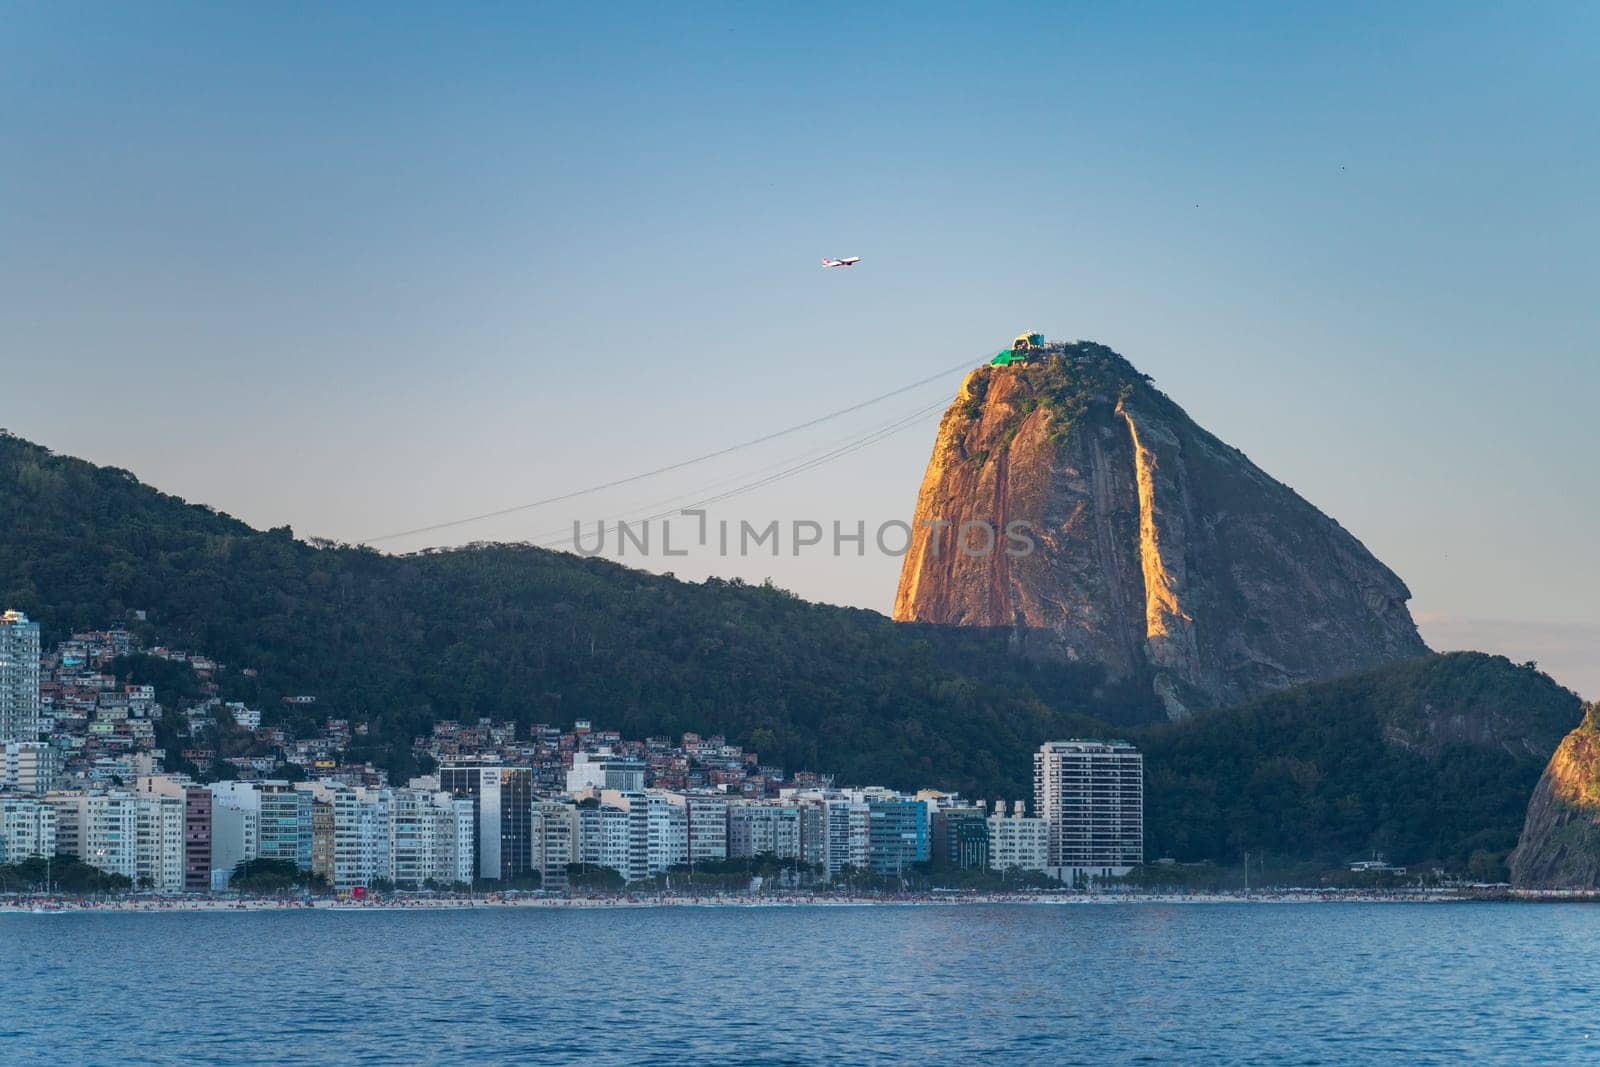 Plane taking off over Rio with Sugarloaf Mountain and Copacabana Beach in view against a blue sky.